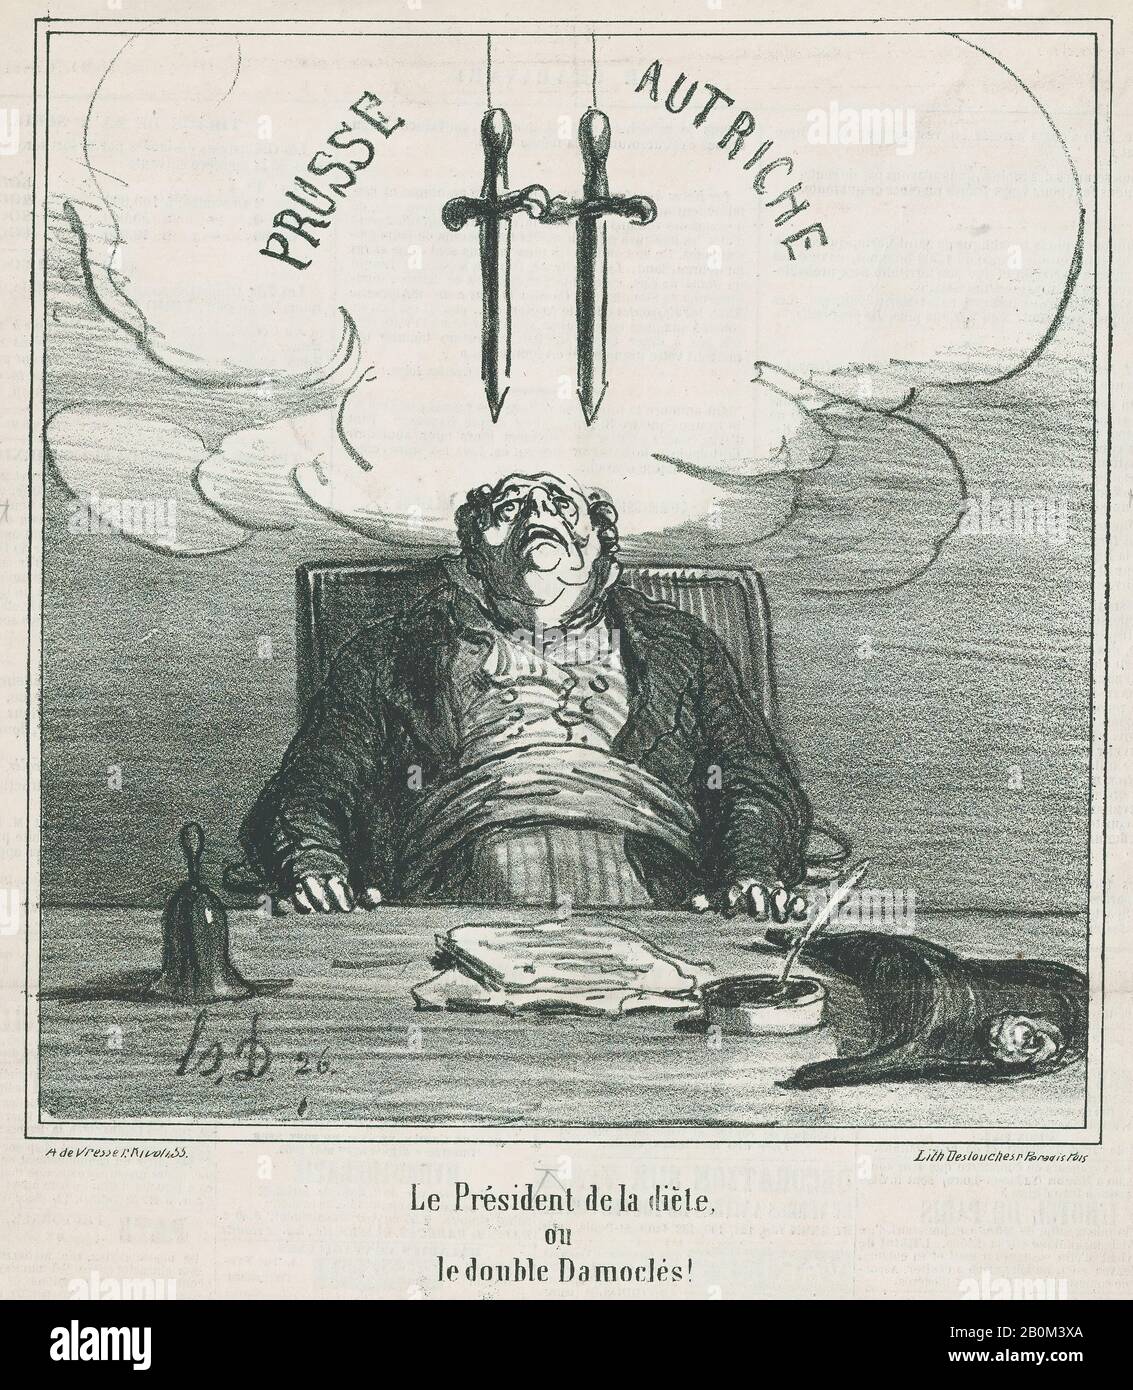 Honoré Daumier, The president of the federal diet or the double sword of Damocles, from 'News of the day,' published in Le Charivari, June 22, 1866, 'News of the day' (Actualités), Honoré Daumier (French, Marseilles 1808–1879 Valmondois), June 22, 1866, Lithograph on newsprint; second state of three (Delteil), Image: 8 15/16 × 8 9/16 in. (22.7 × 21.8 cm), Sheet: 11 3/4 × 11 7/16 in. (29.9 × 29 cm), Prints Stock Photo